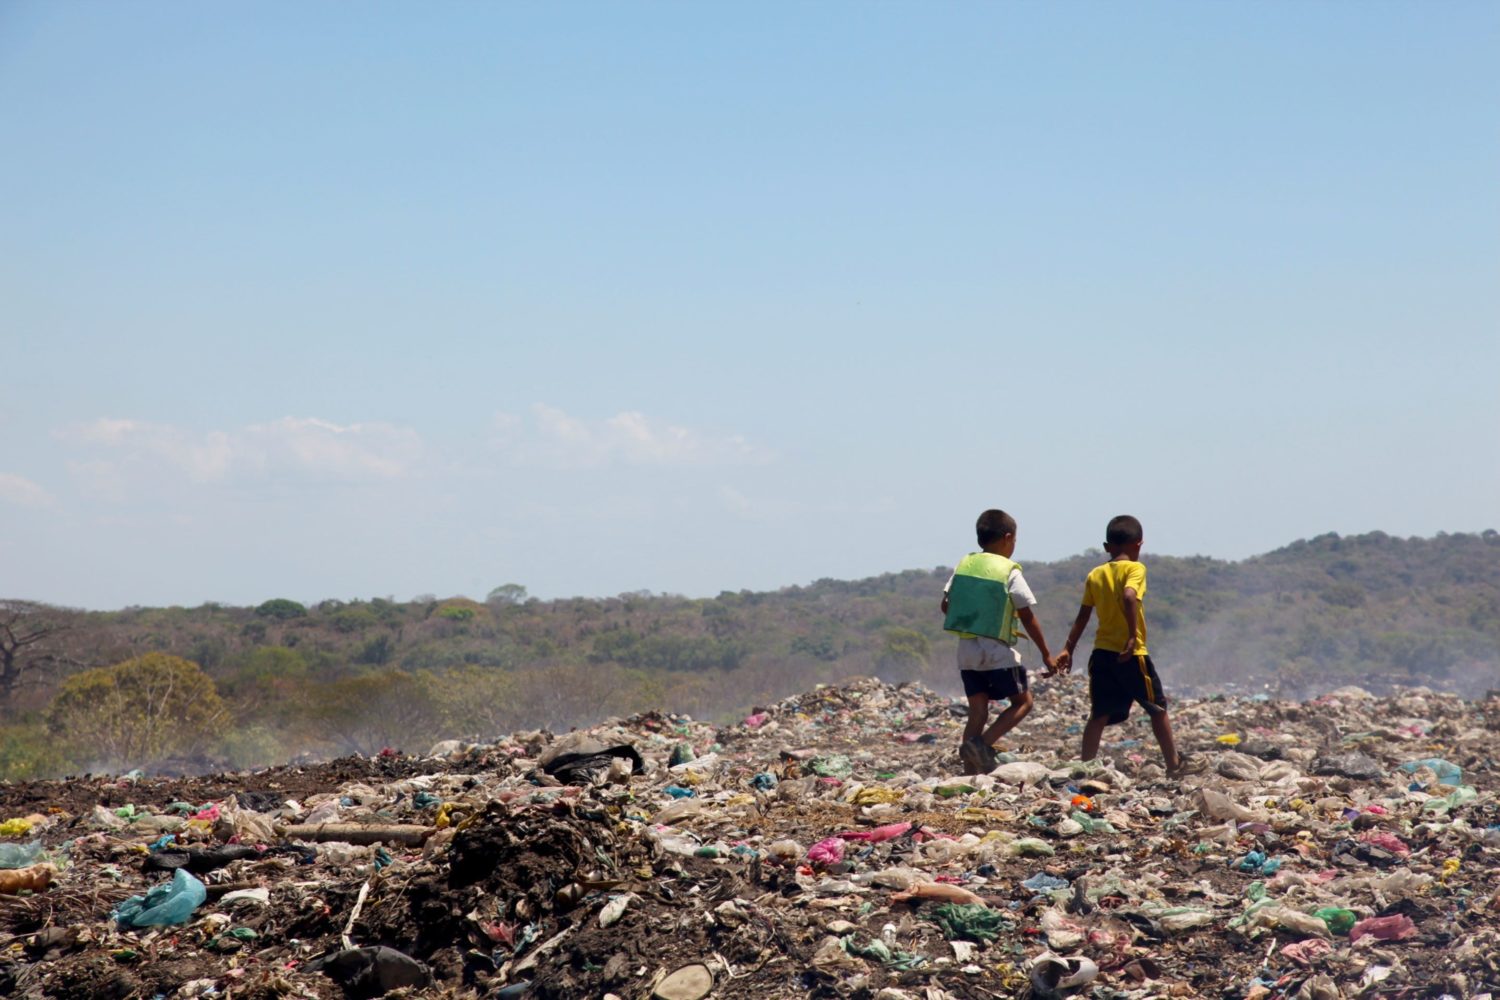 2 boys collecting items in a landfill